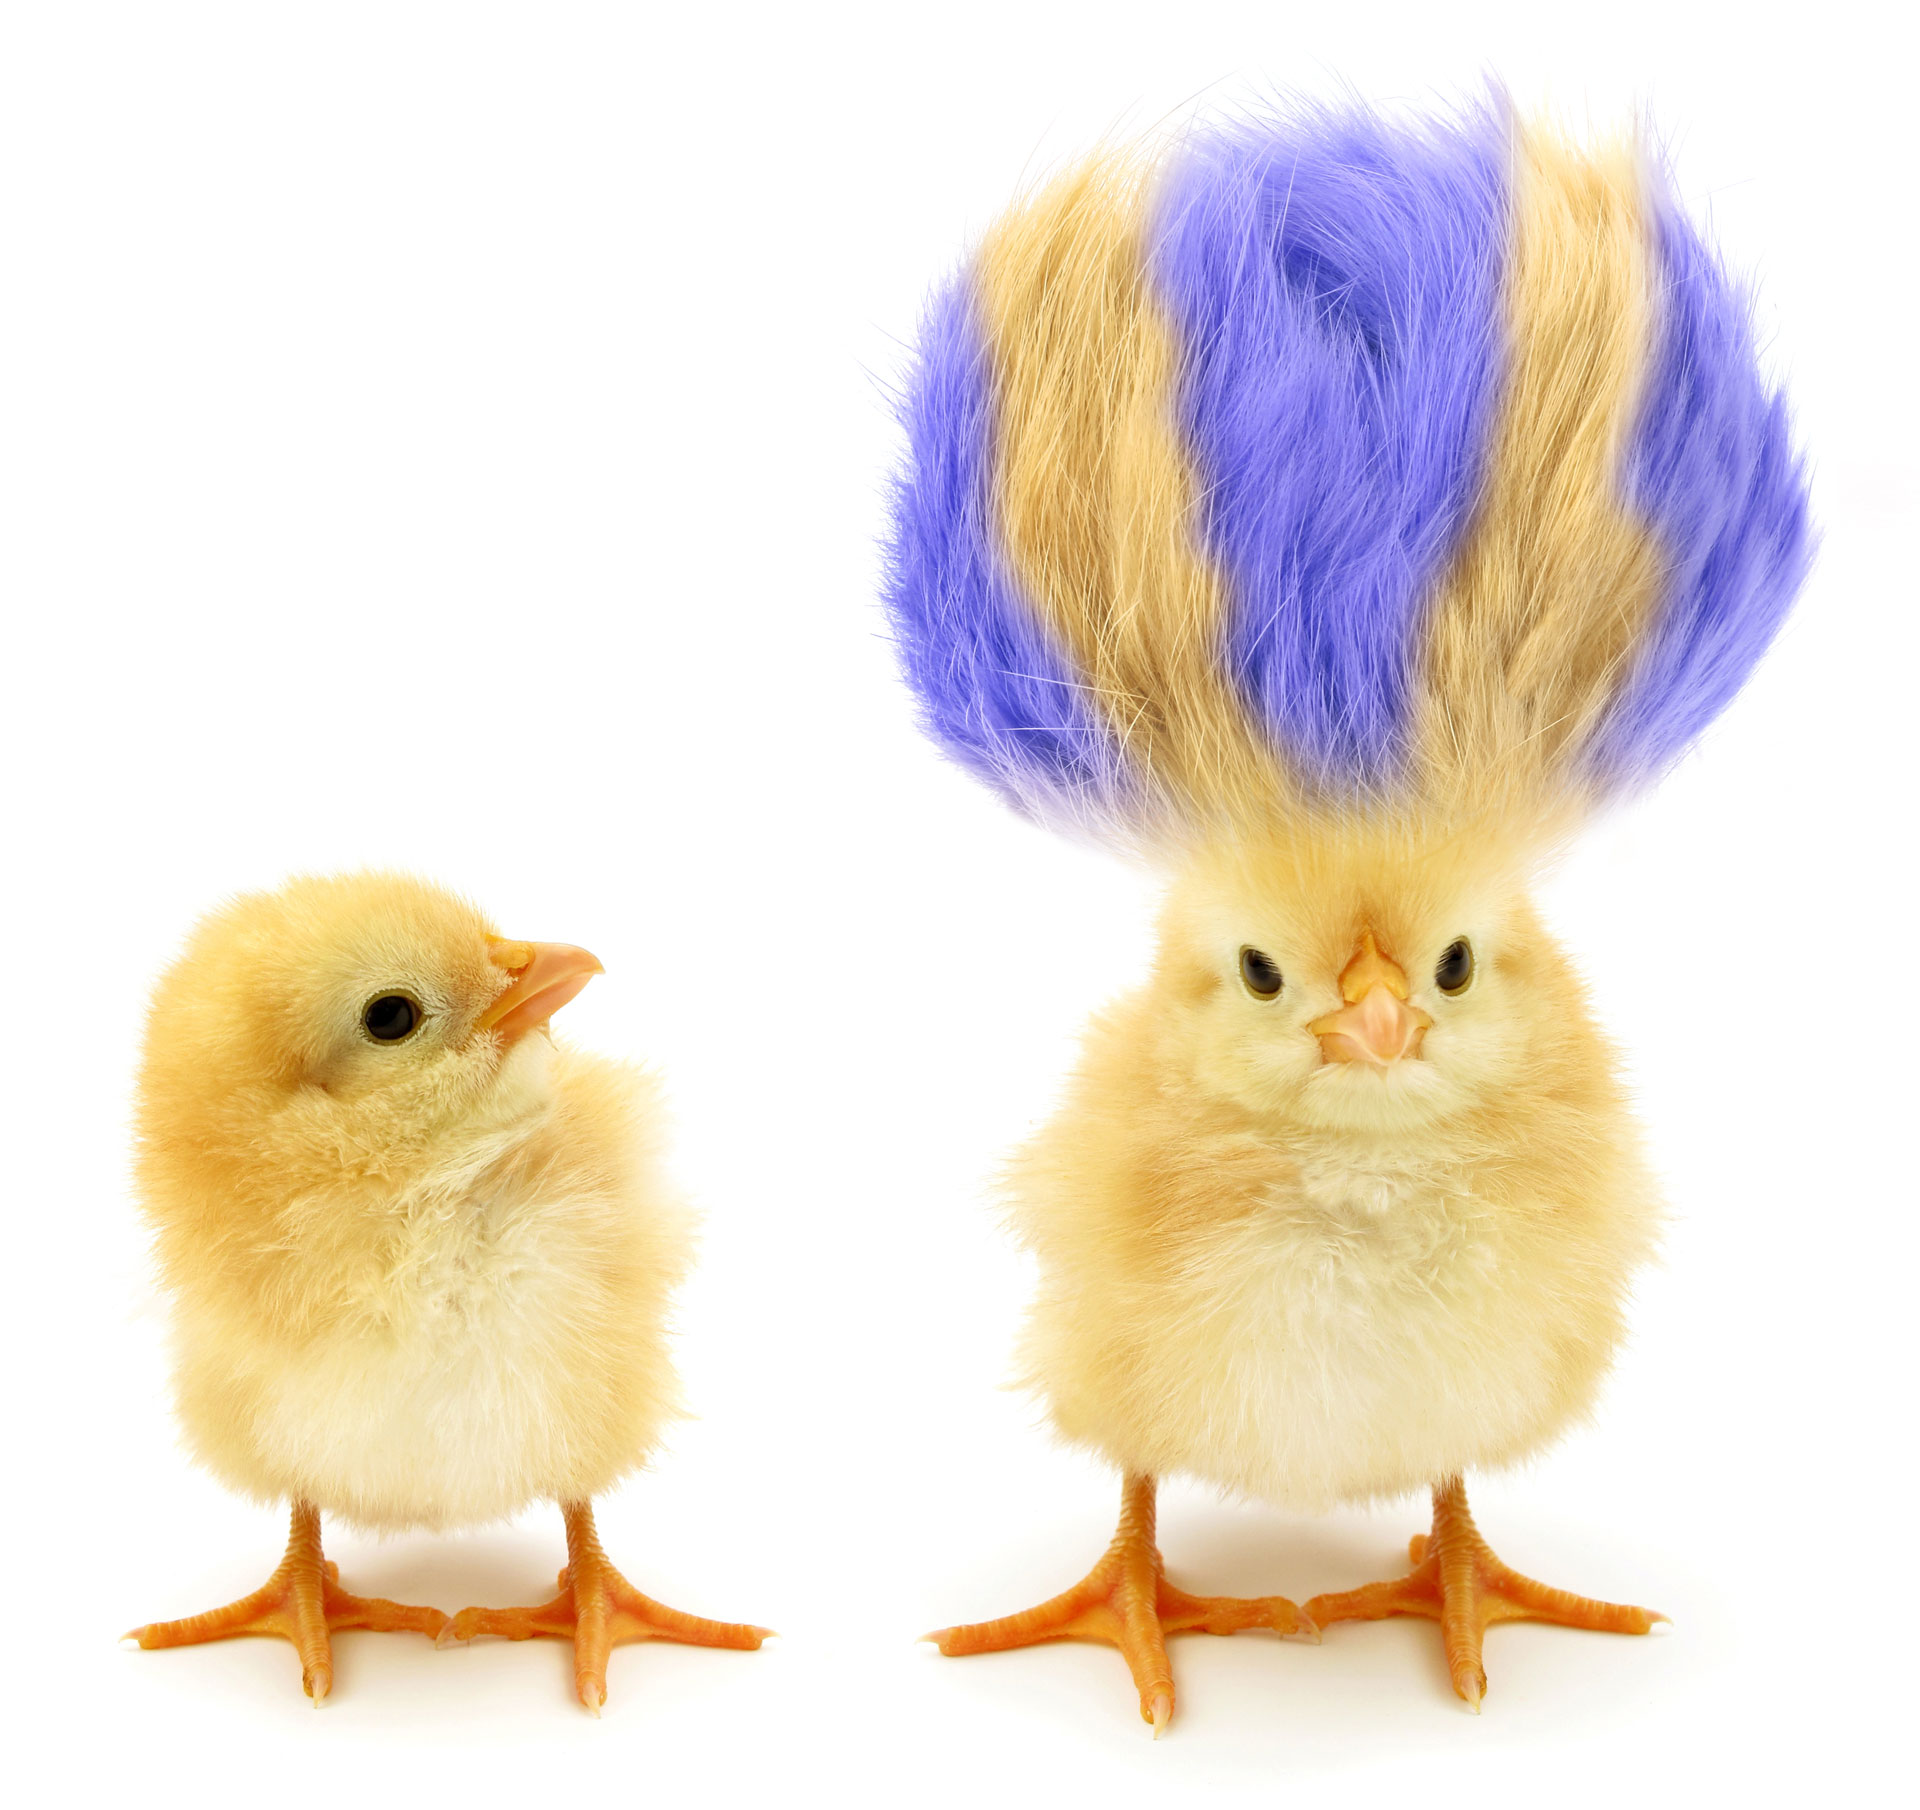 A chick with interesting hair